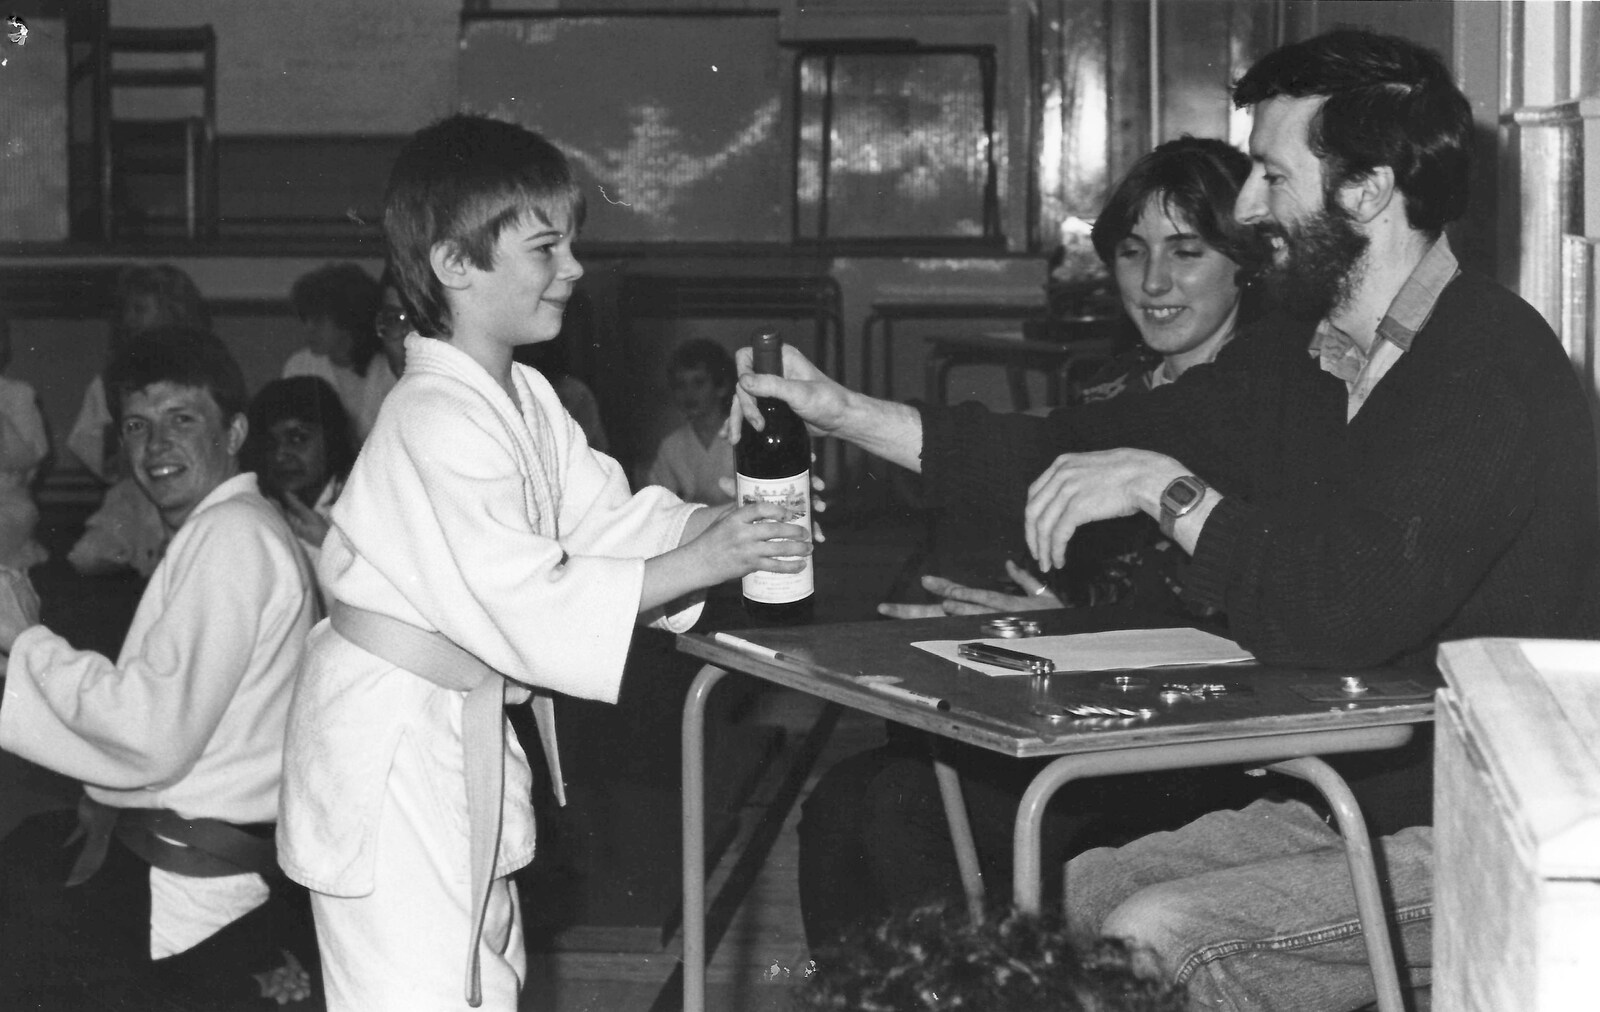 Dai Edwards hands out a prize in a Jiu-Jitsu competition from Uni: The Second Year in Black and White, Plymouth Polytehnic, Devon - 8th March 1987